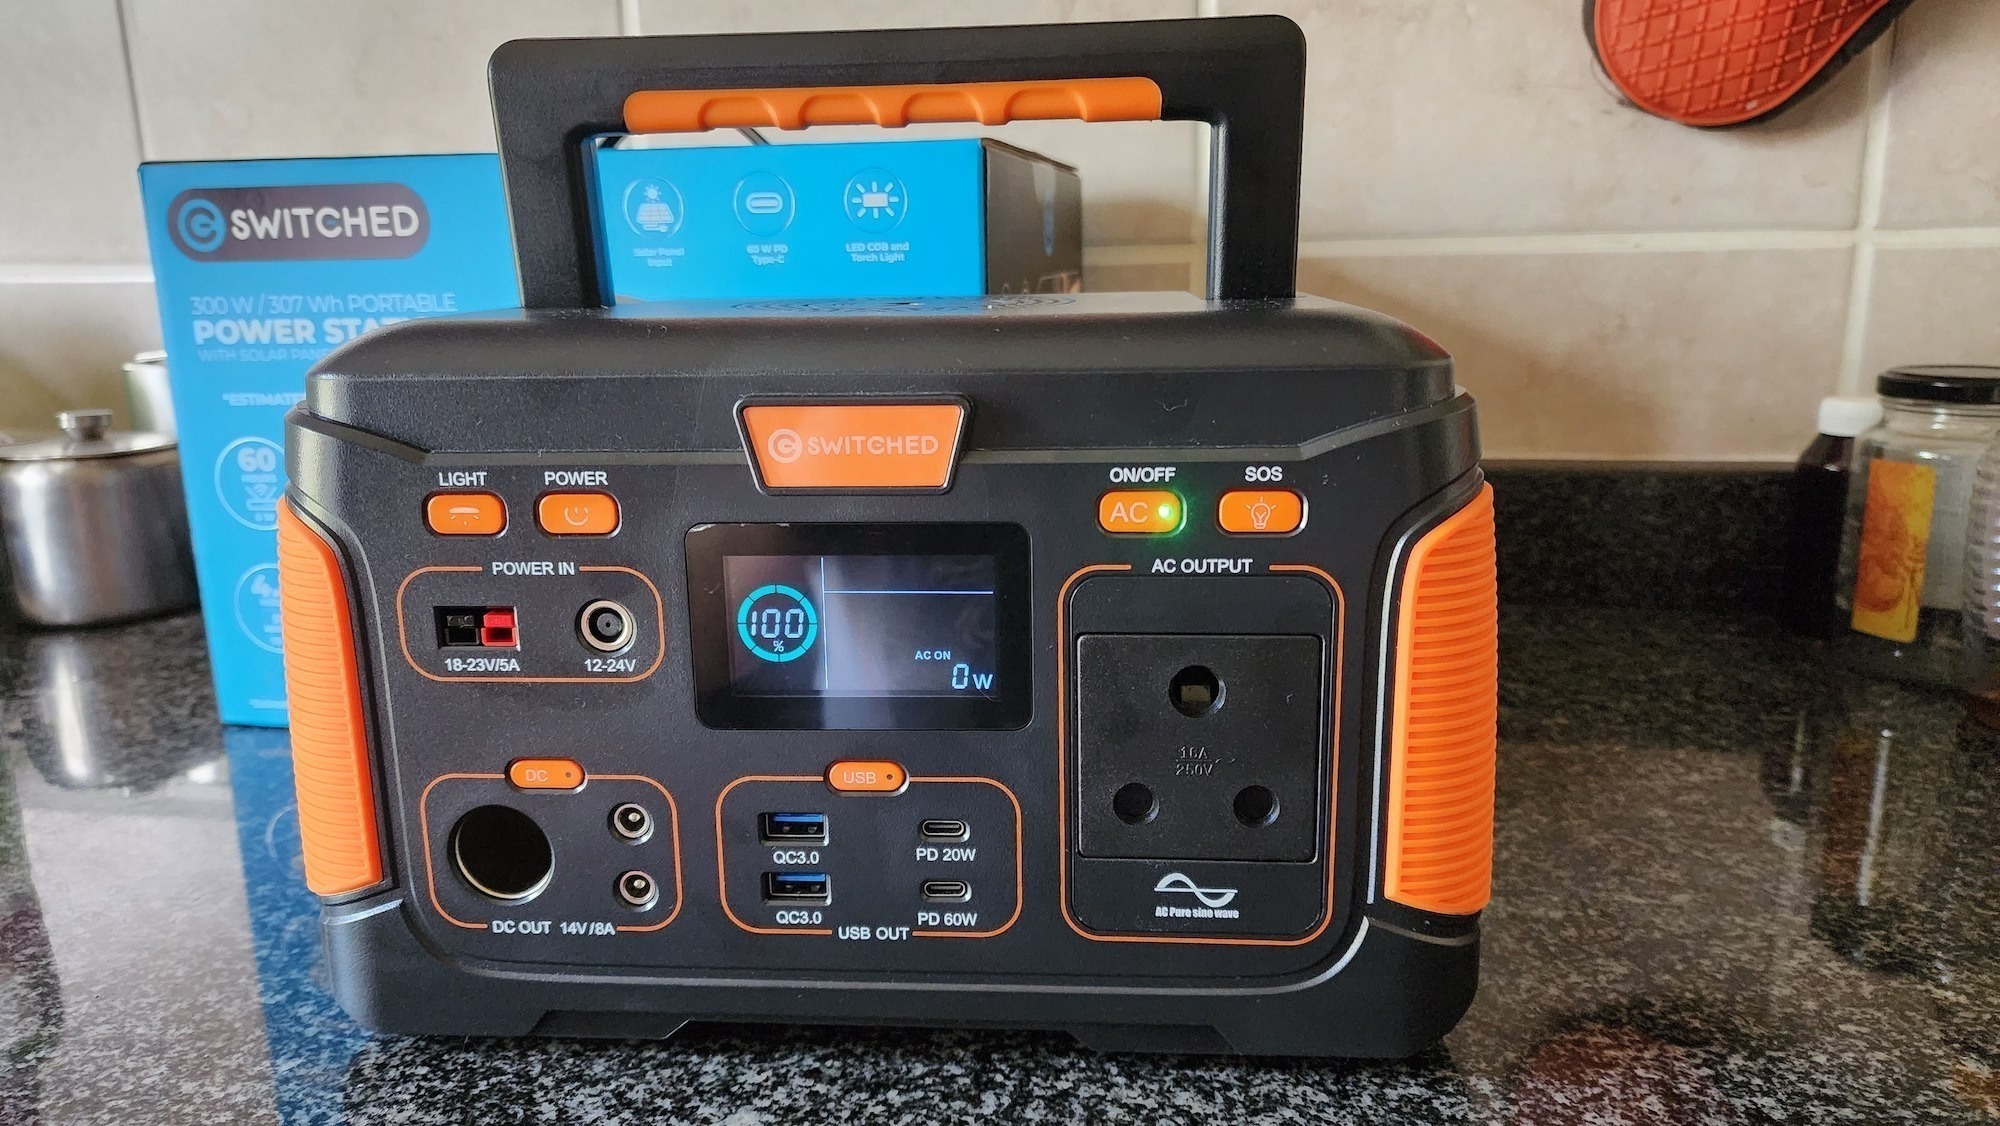 Switched 300W/307Wh Portable Power Station Review - A Different Kind Of  Orange Box - Stuff South Africa